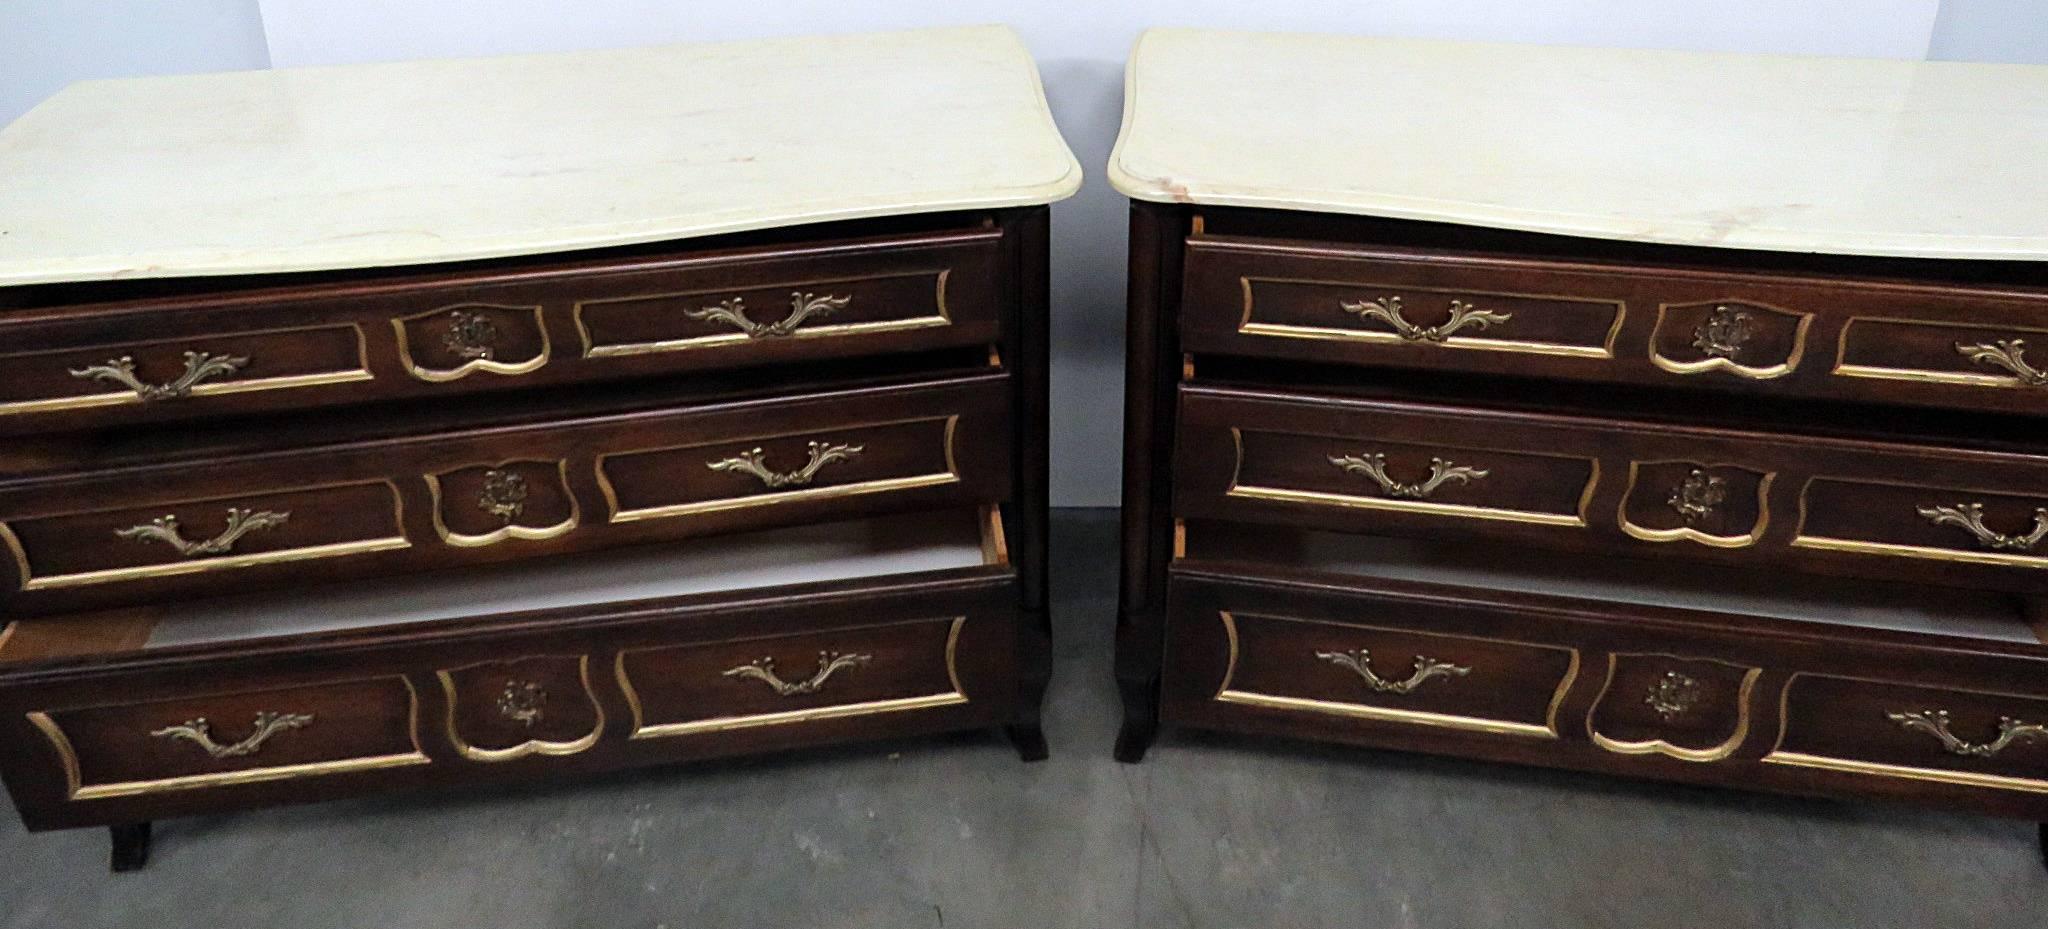 Pair of Drexel Marble-Top Commodes 2